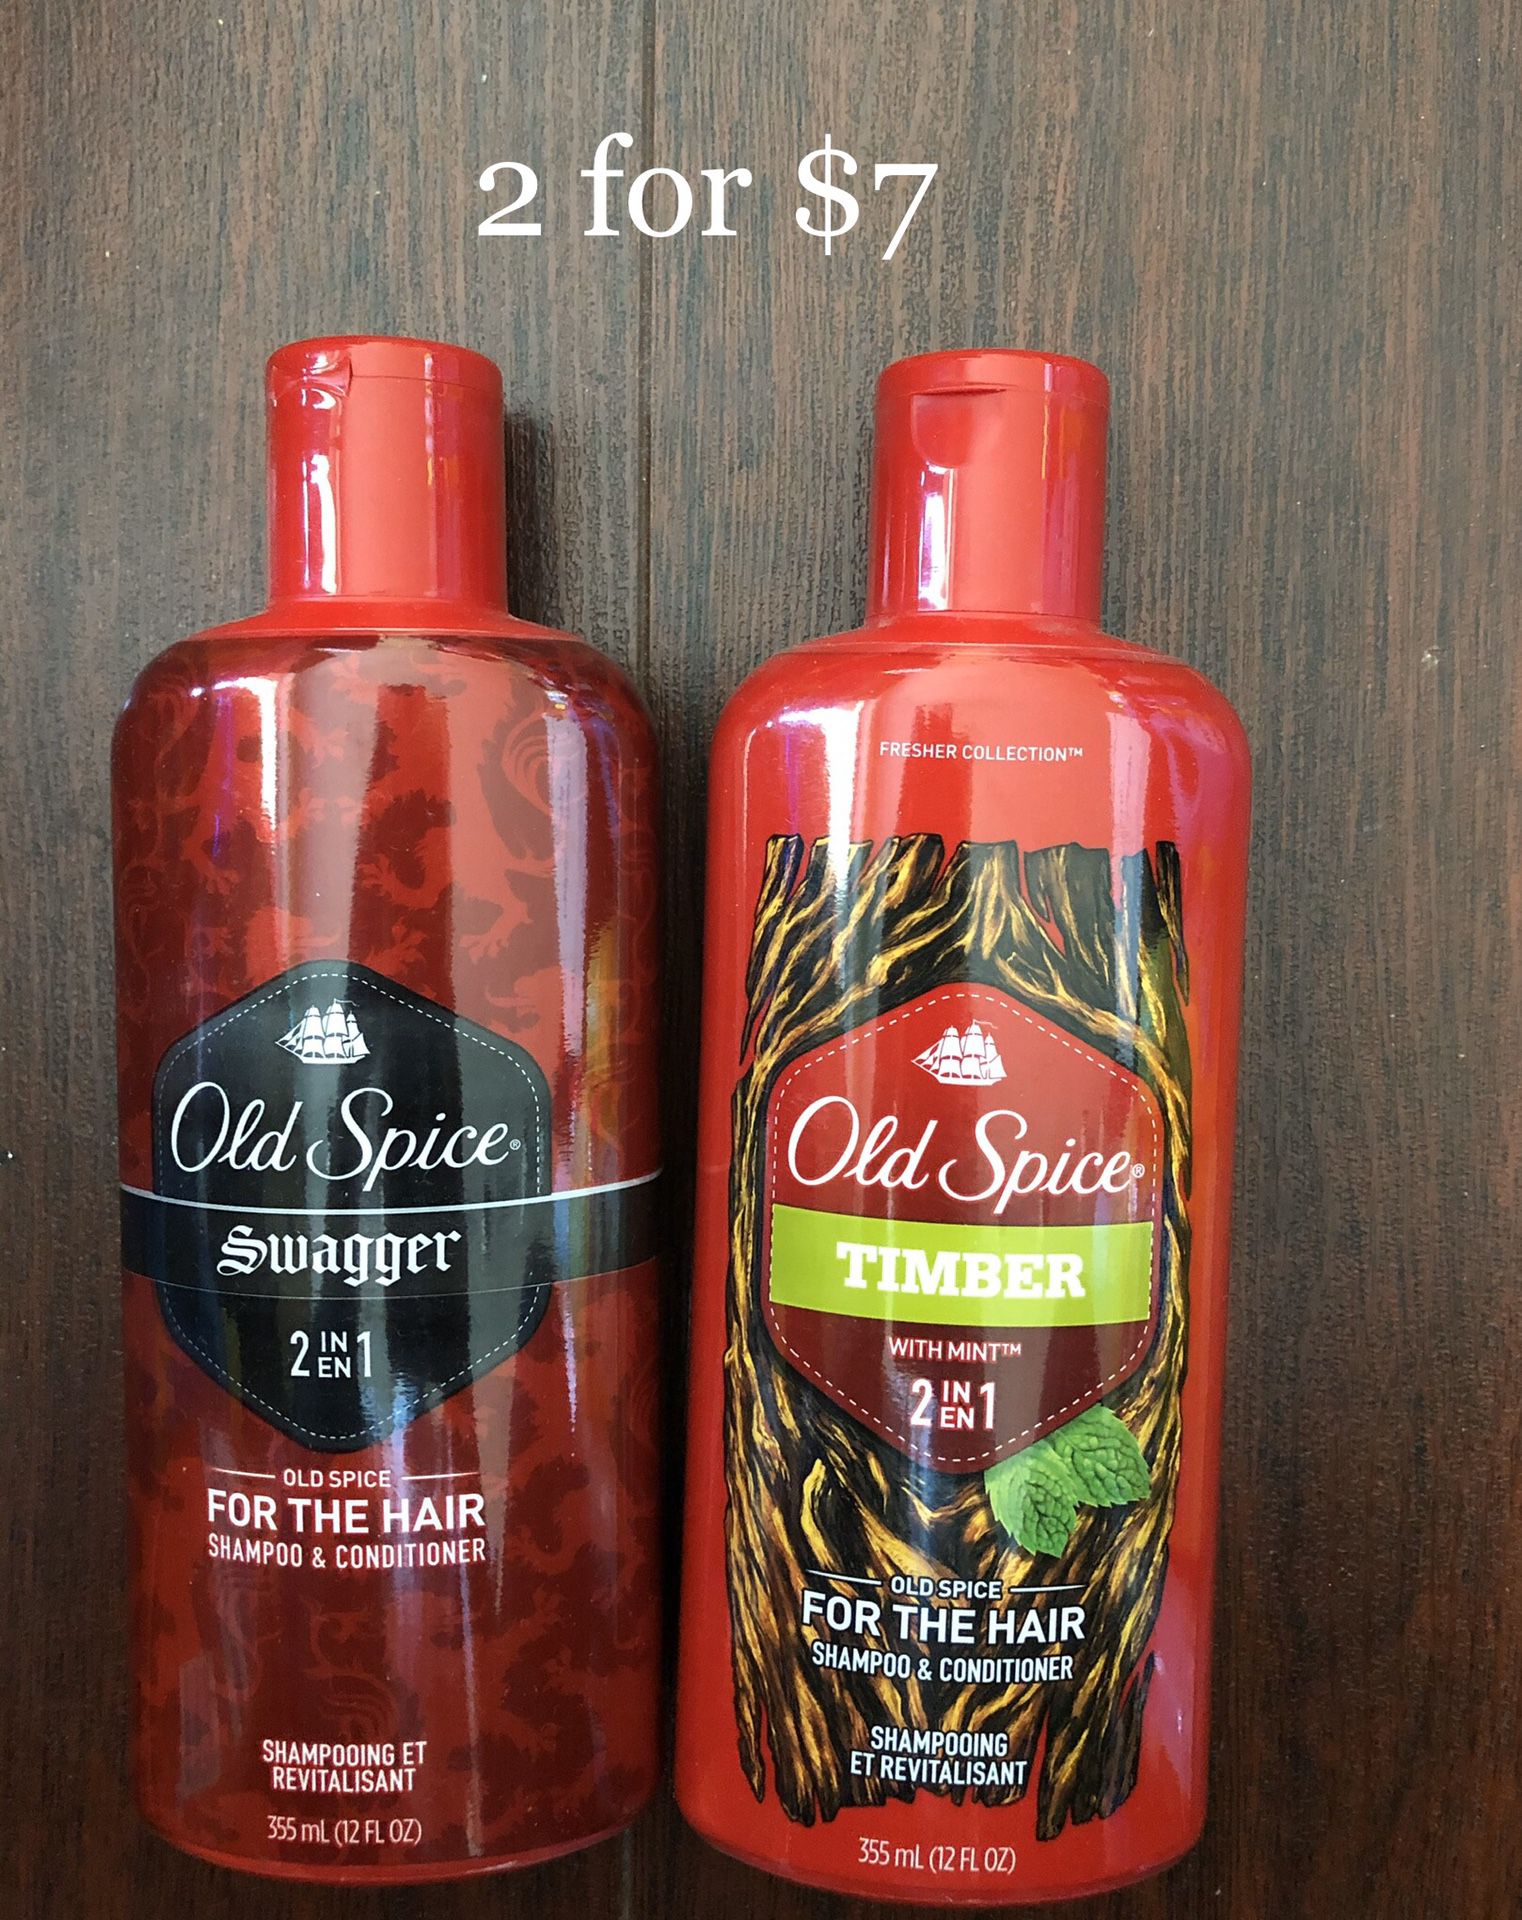 Old Spice Hair 2 in 1 Shampoo & Conditioner: 2 for $7